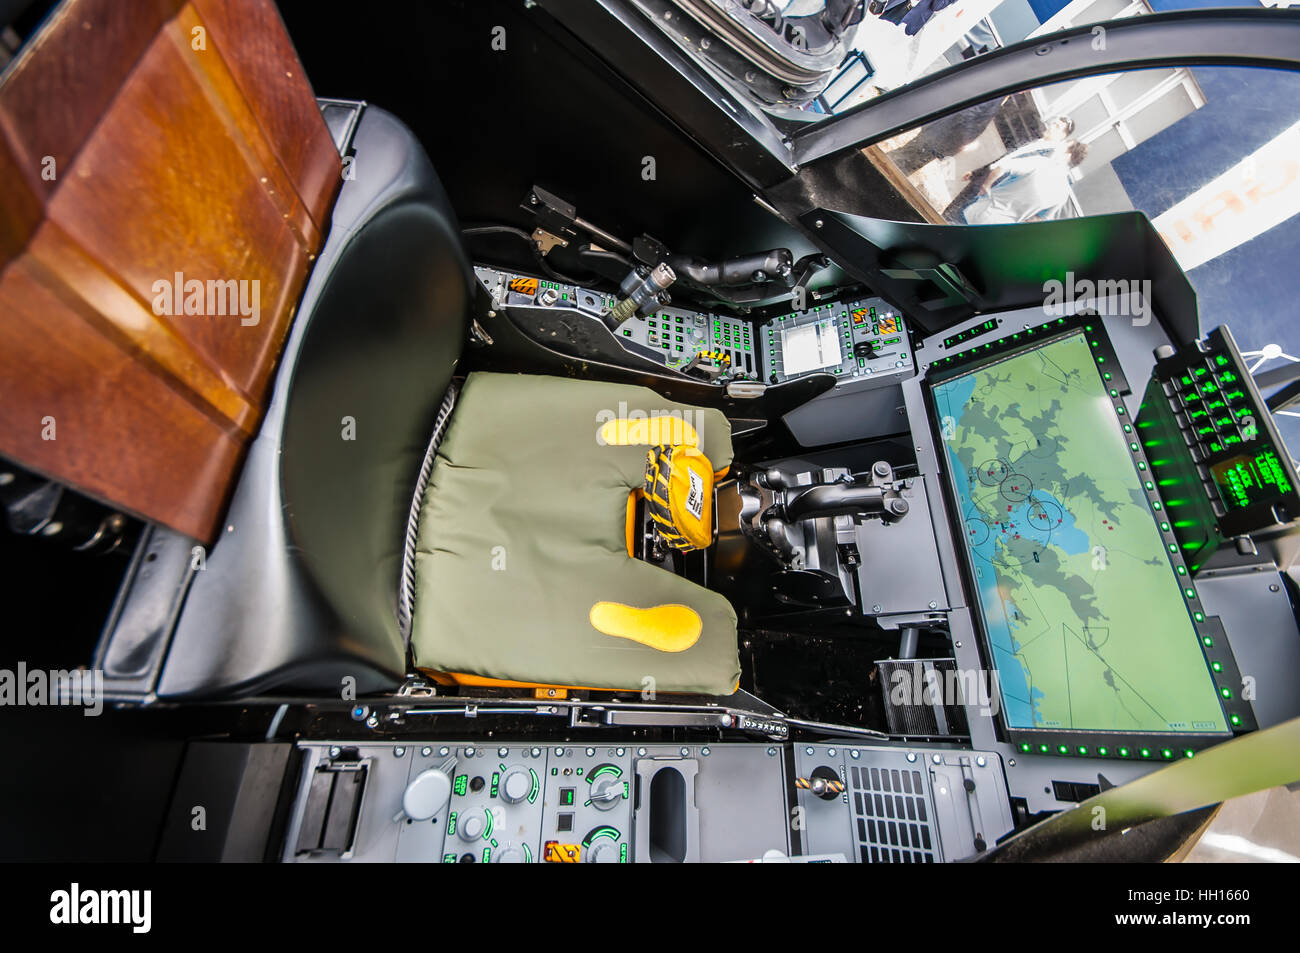 Demo Cockpit Of Saab Gripen Jas 39e Single Seat Production Version Developed From The Gripen Ng Program Sweden And Brazil Have Ordered The Variant Stock Photo Alamy